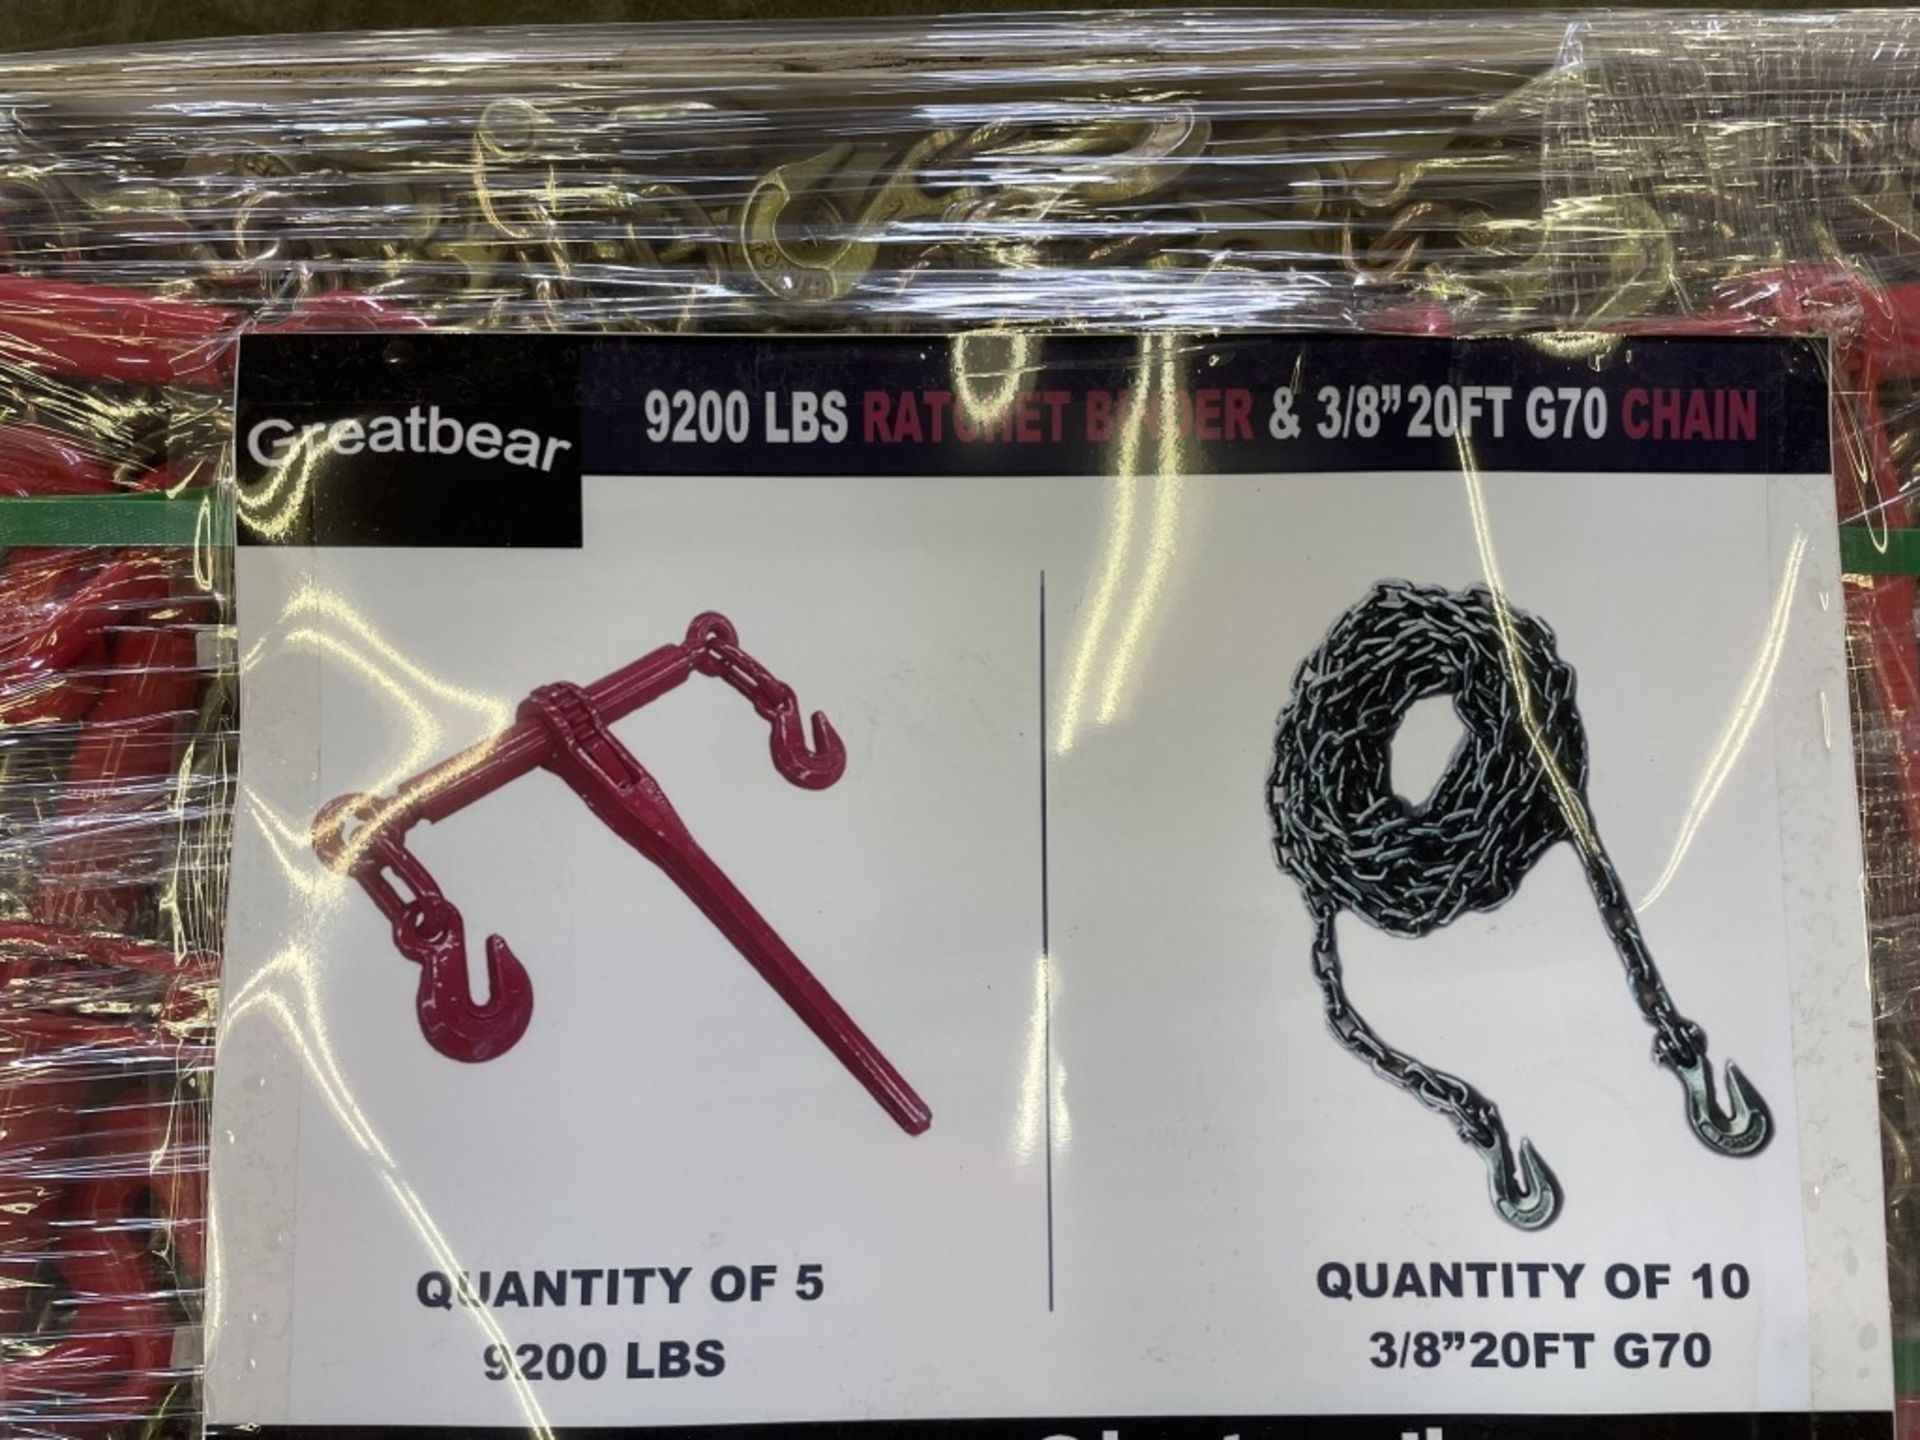 2021 Greatbear Ratchet Binders & Chains - Image 2 of 2